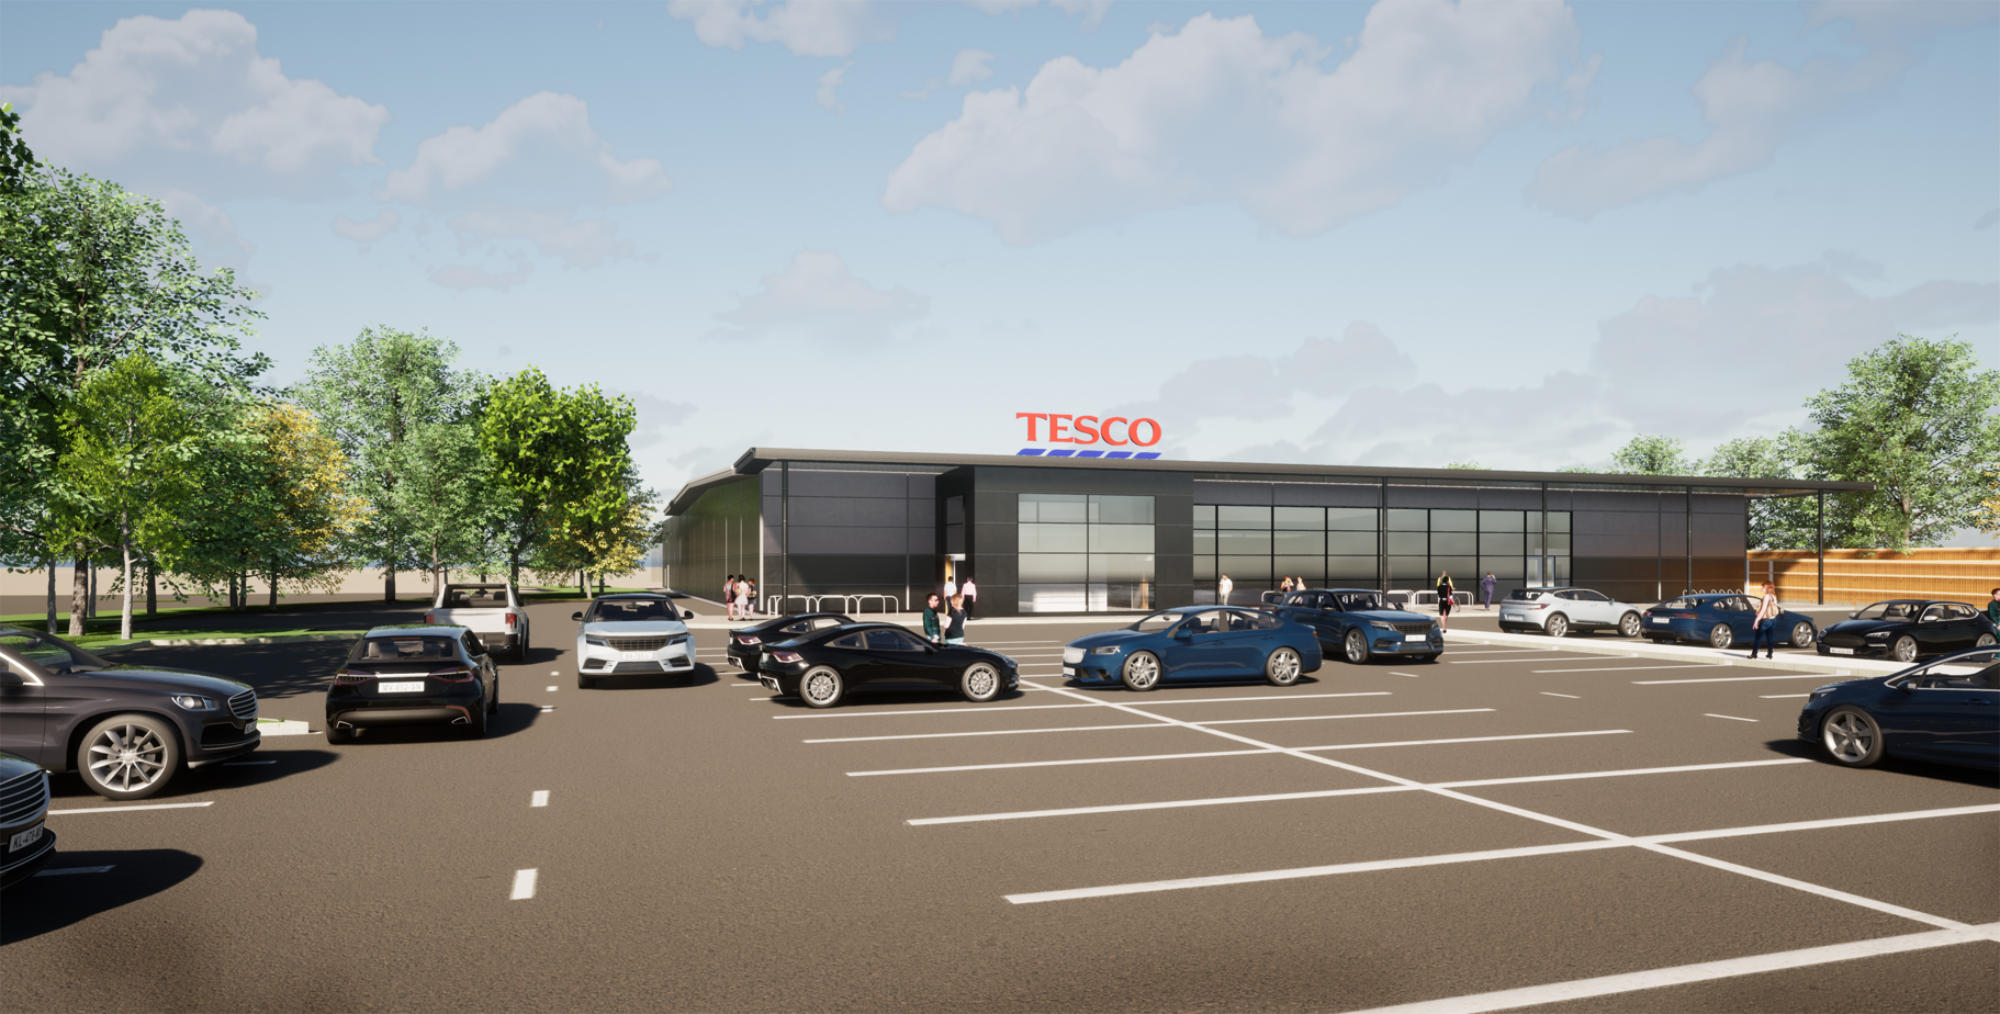 Tesco’s plan for a new supermarket in Harrogate submitted